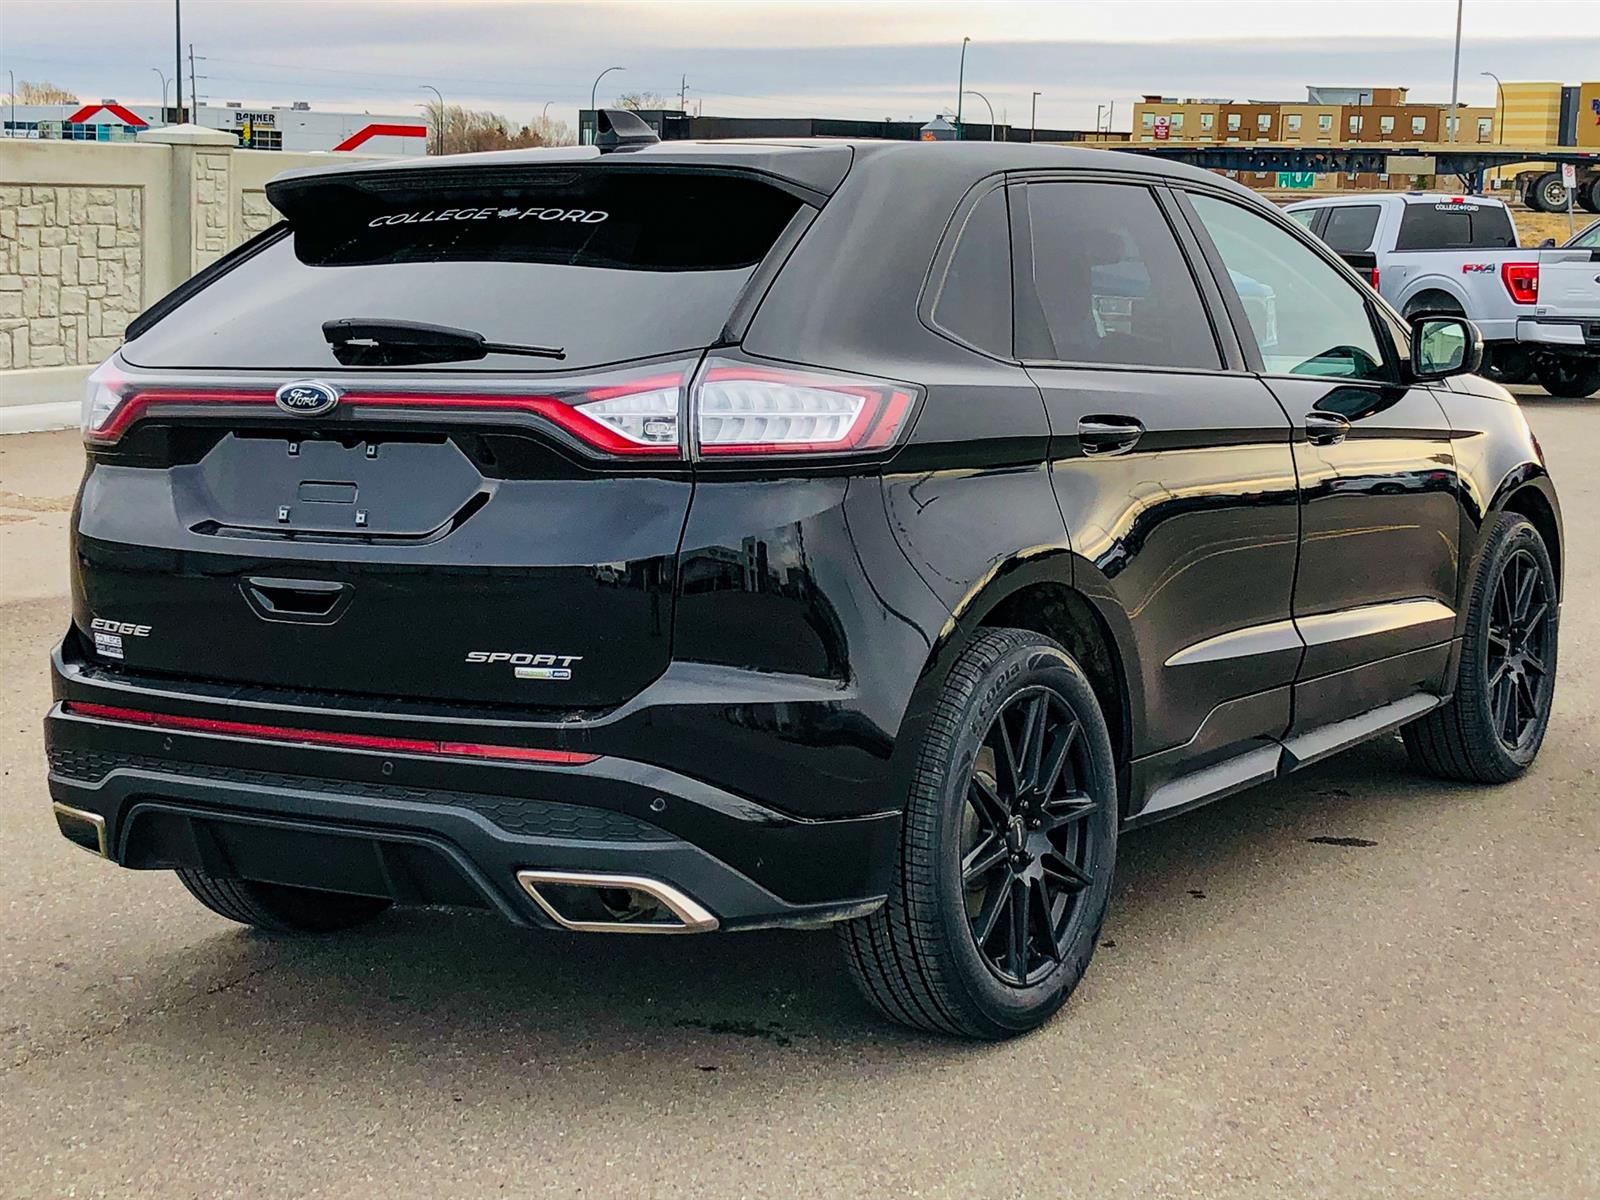 2018 Ford Edge SPORT | 2.7L V6 | AWD | PANORAMIC ROOF | HEATED STEERING WHEEL